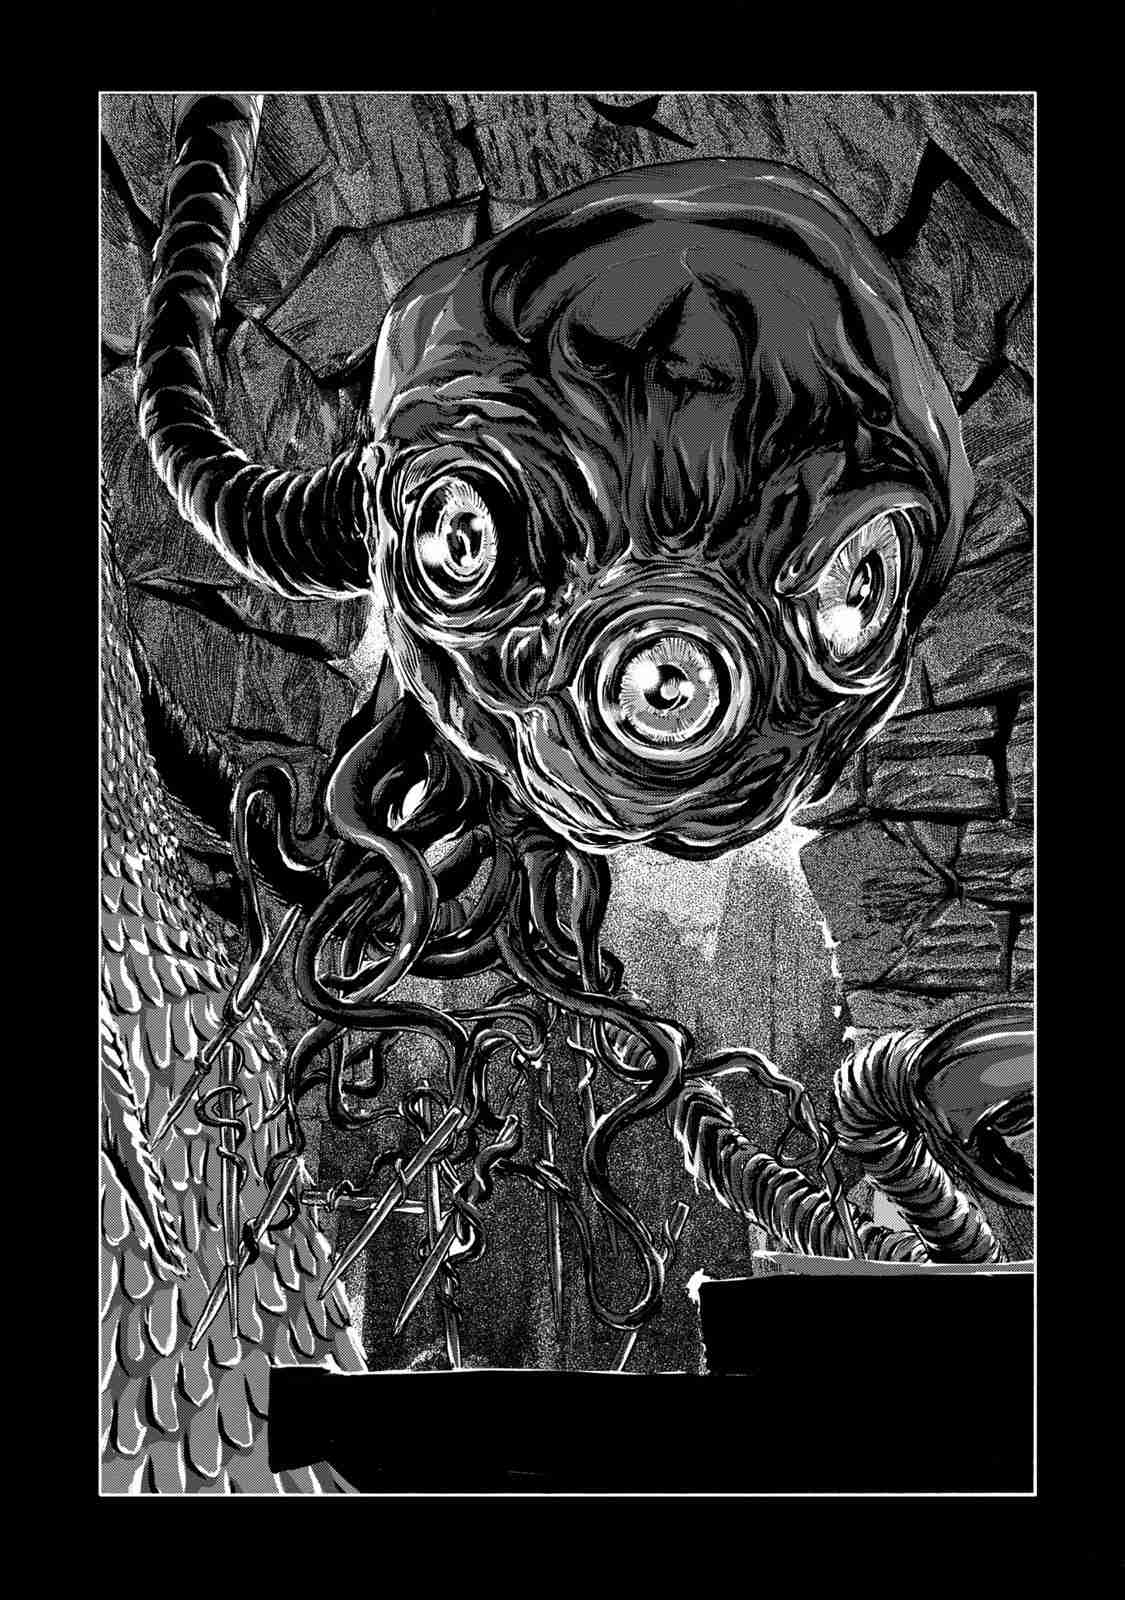 H.P. Lovecraft's The Shadow out of Time Vol. 1 Ch. 4 Tormenting Nightmares